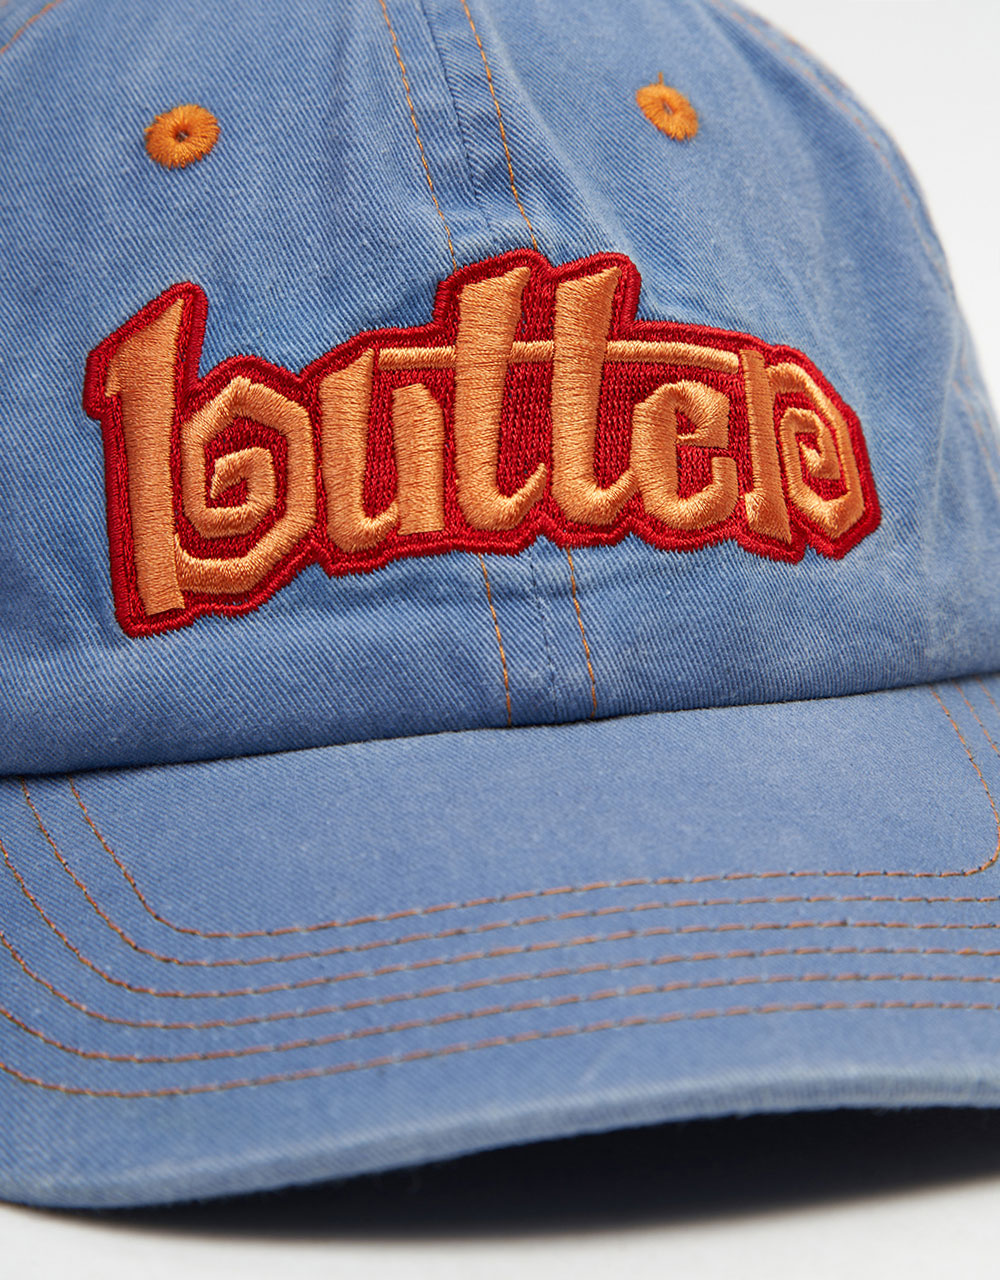 Butter Goods Swirl 6 Panel Cap - Washed Slate